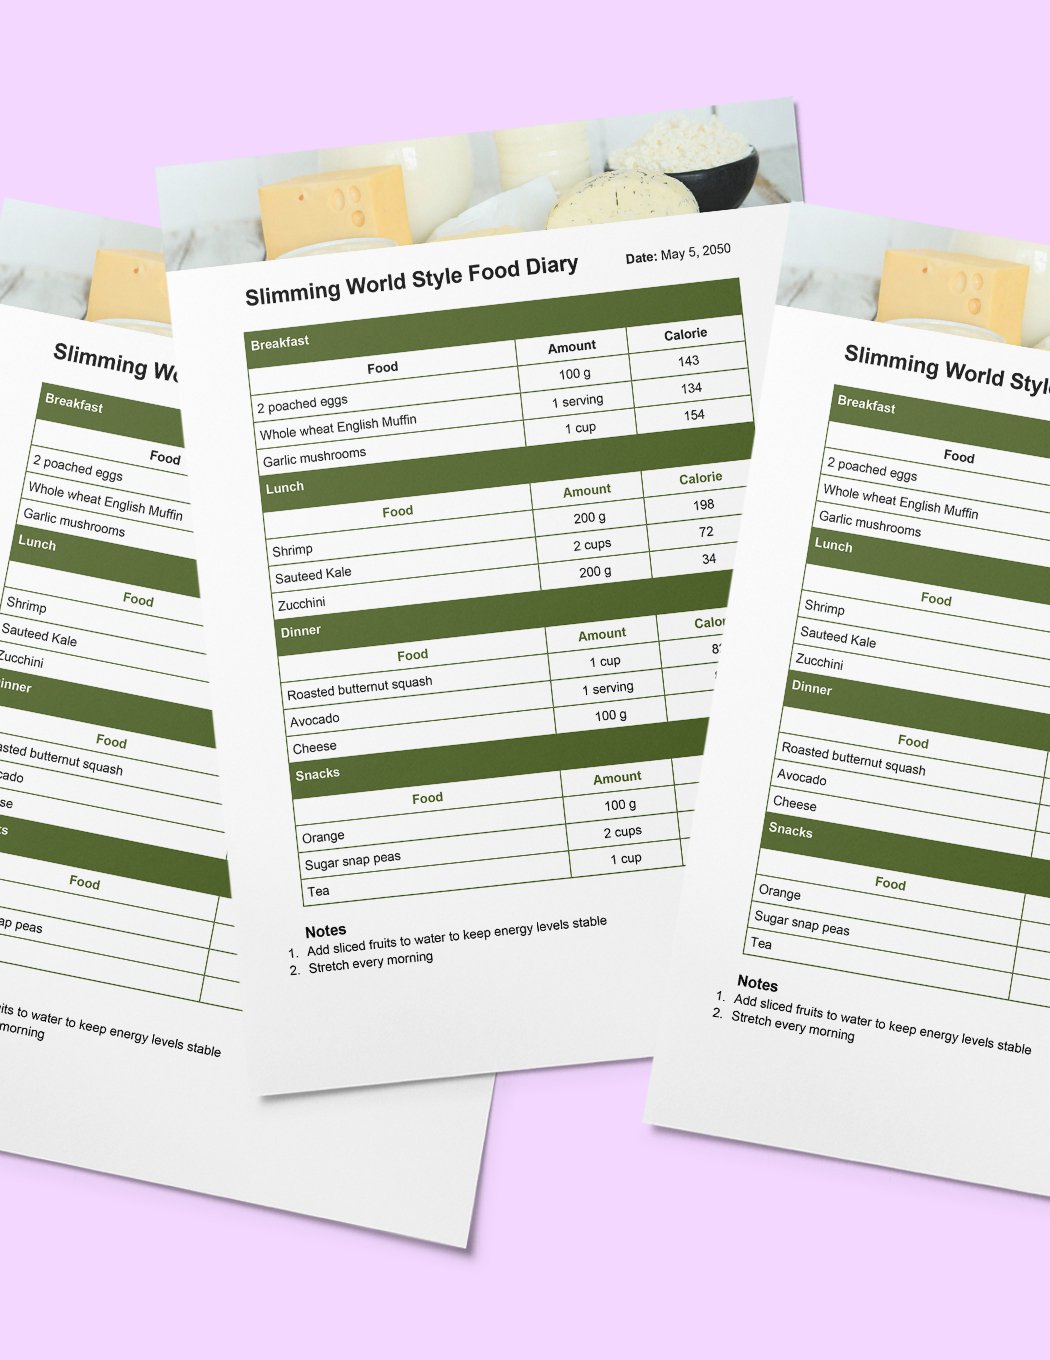 Slimming World Style Food Diary Template